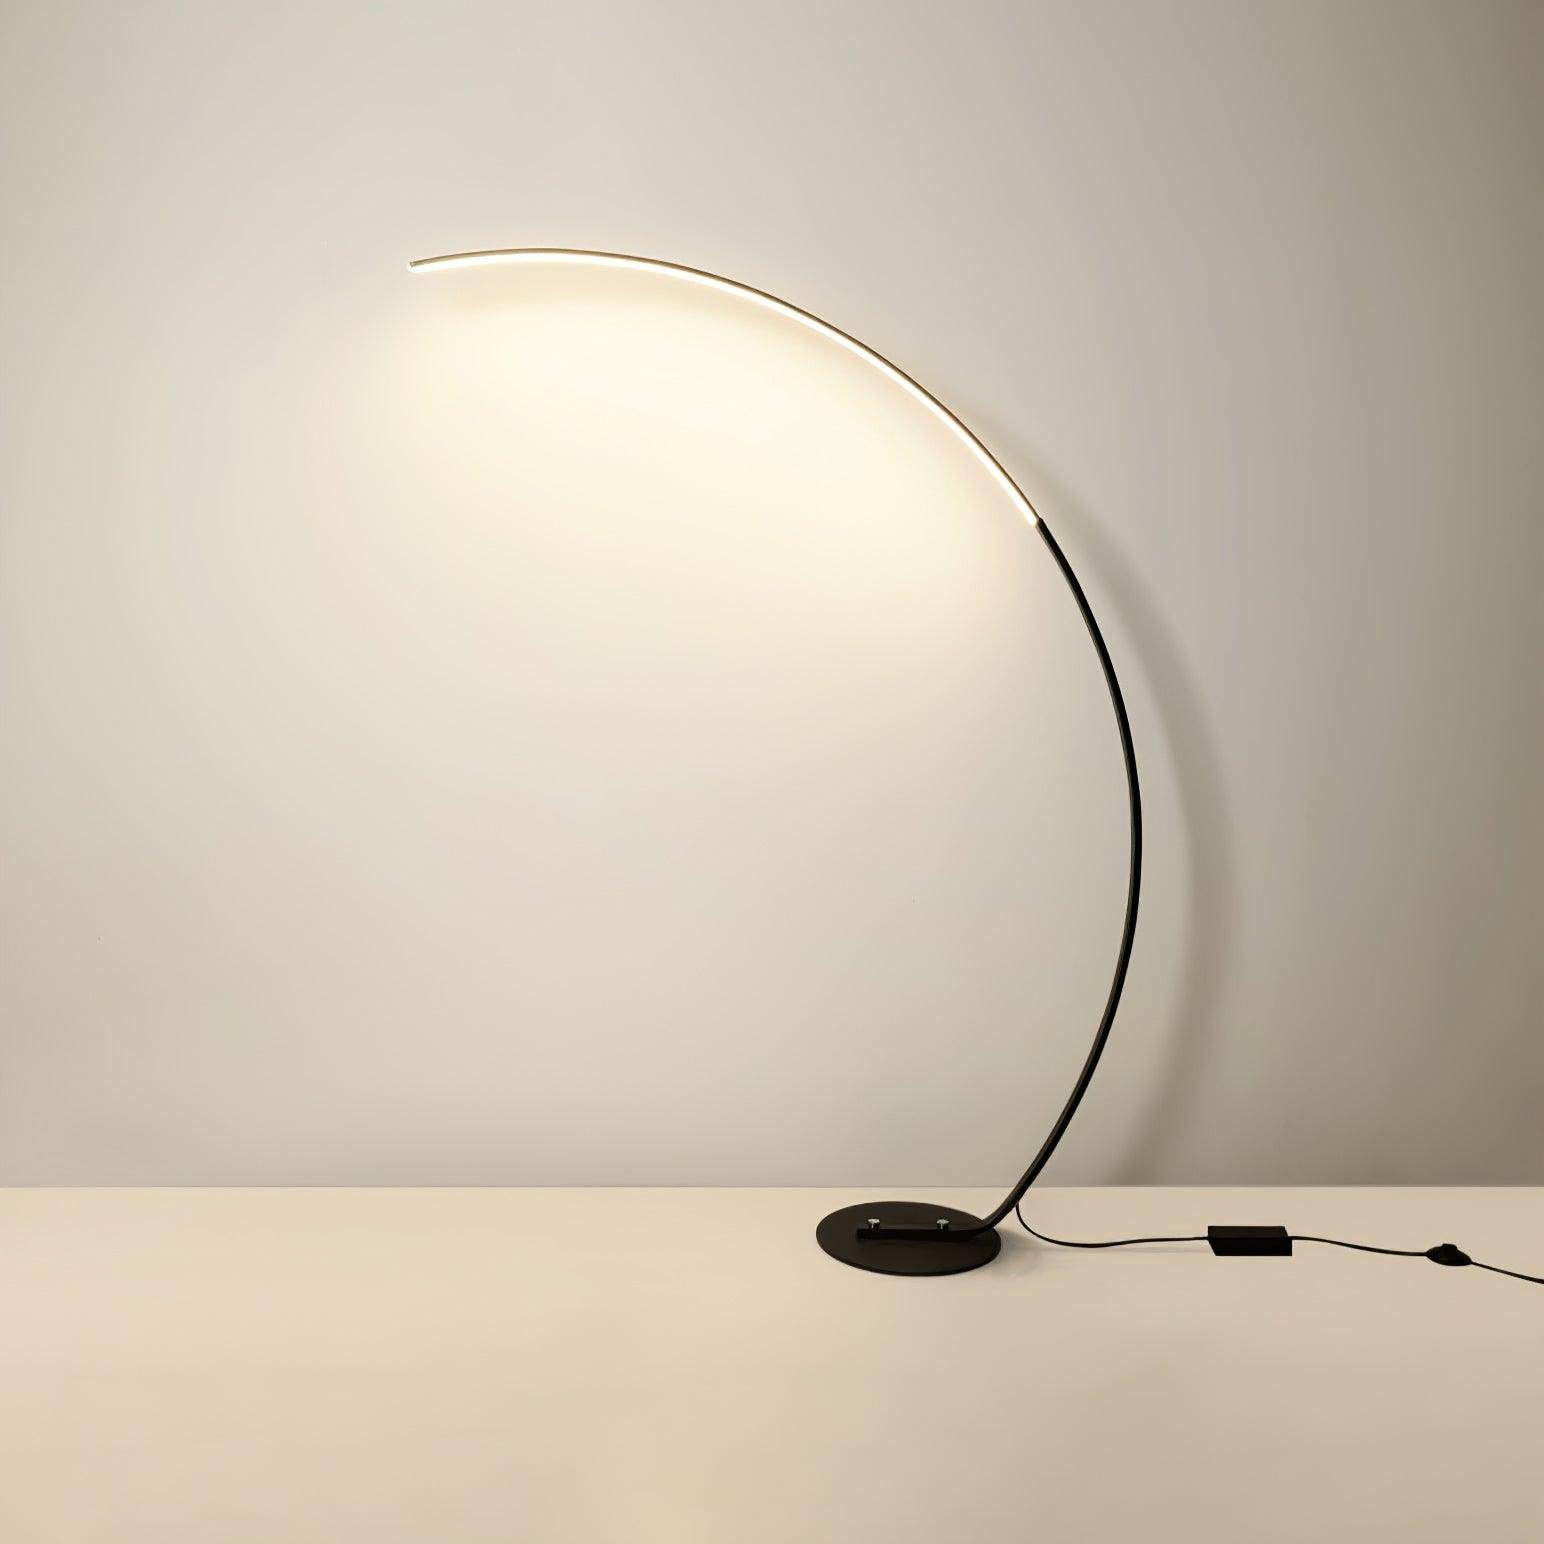 Black Arc Floor Lamp with Dimensions of 47.2″ (W) x 66.9″ (H) or 120cm (W) x 170cm (H), Equipped with EU Plug